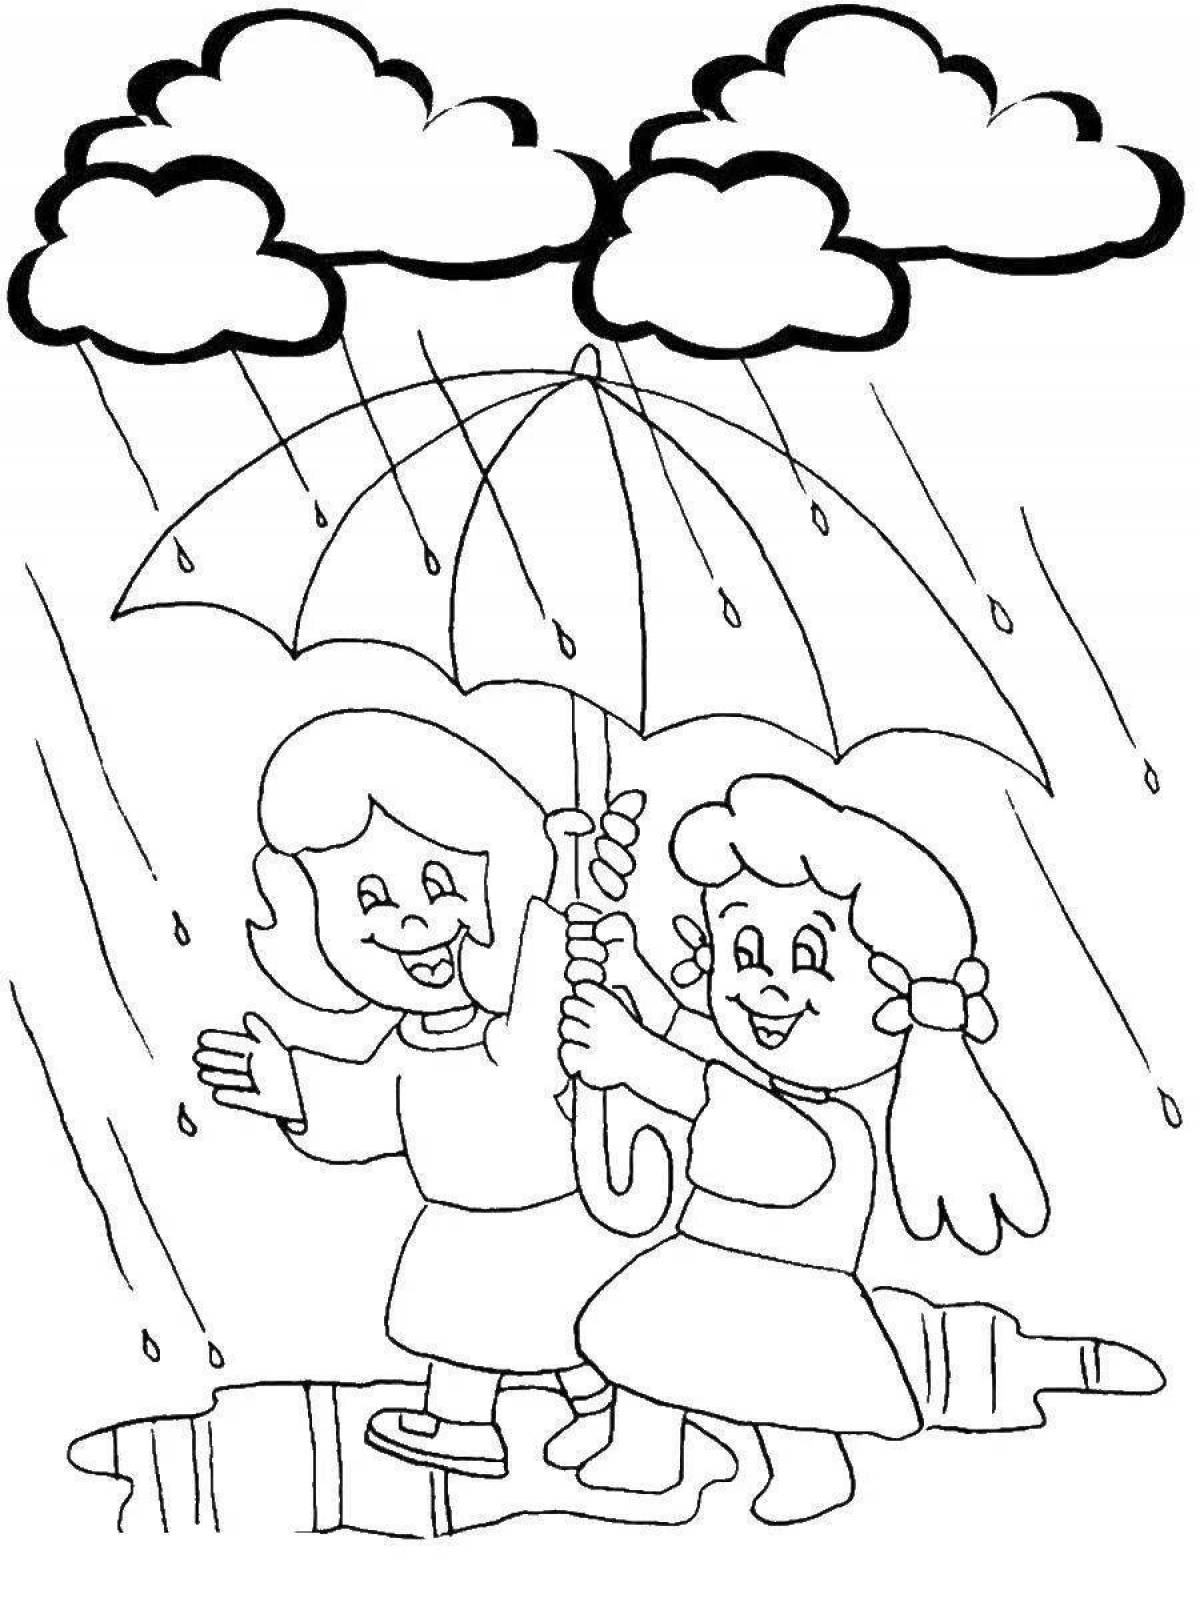 Children's Thunderstorm coloring book for kids